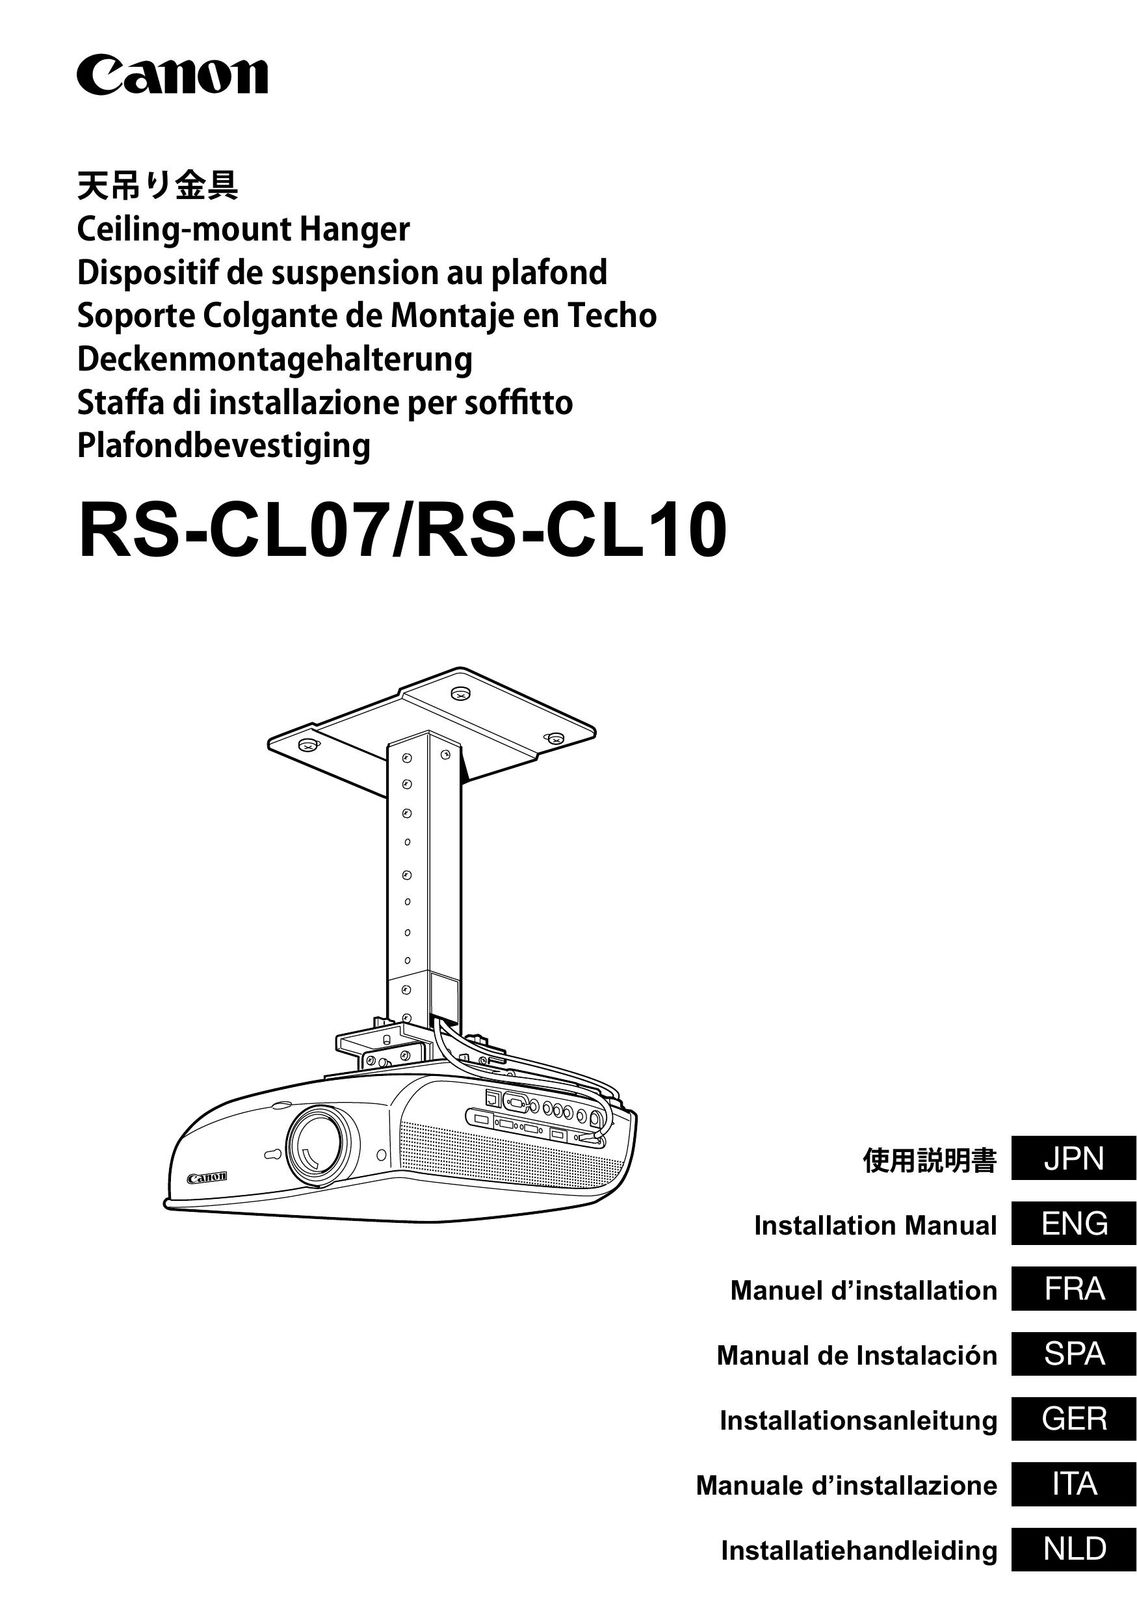 Canon RS-CL07 Indoor Furnishings User Manual